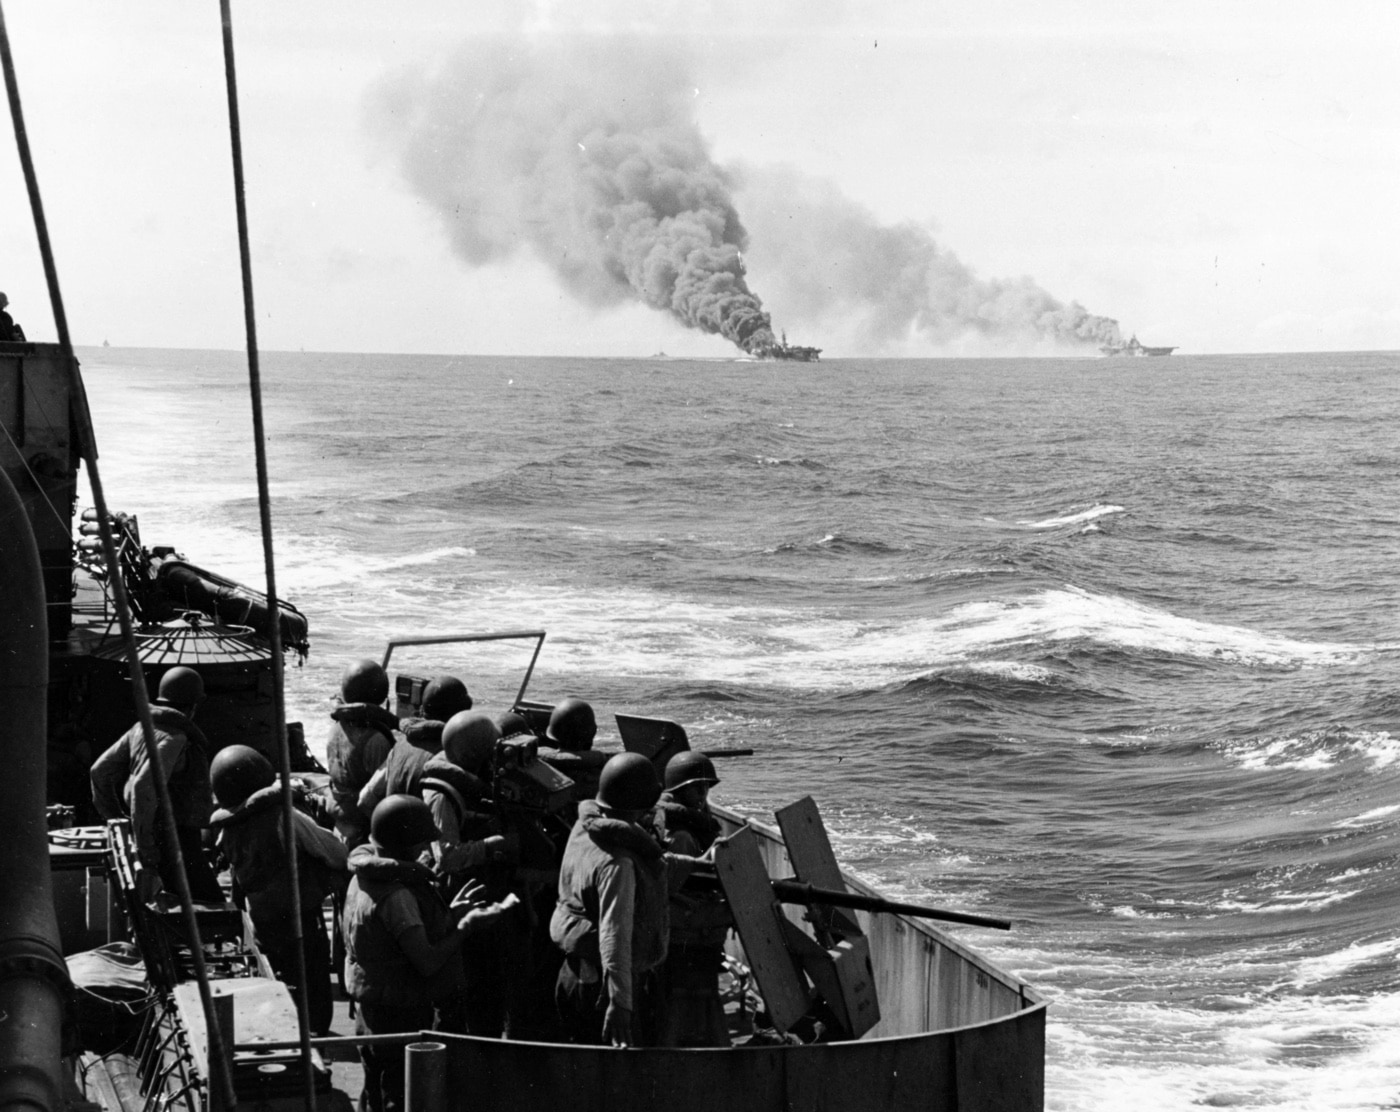 uss belleau wood cvl-24 burns after being hit by a kamikaze plane